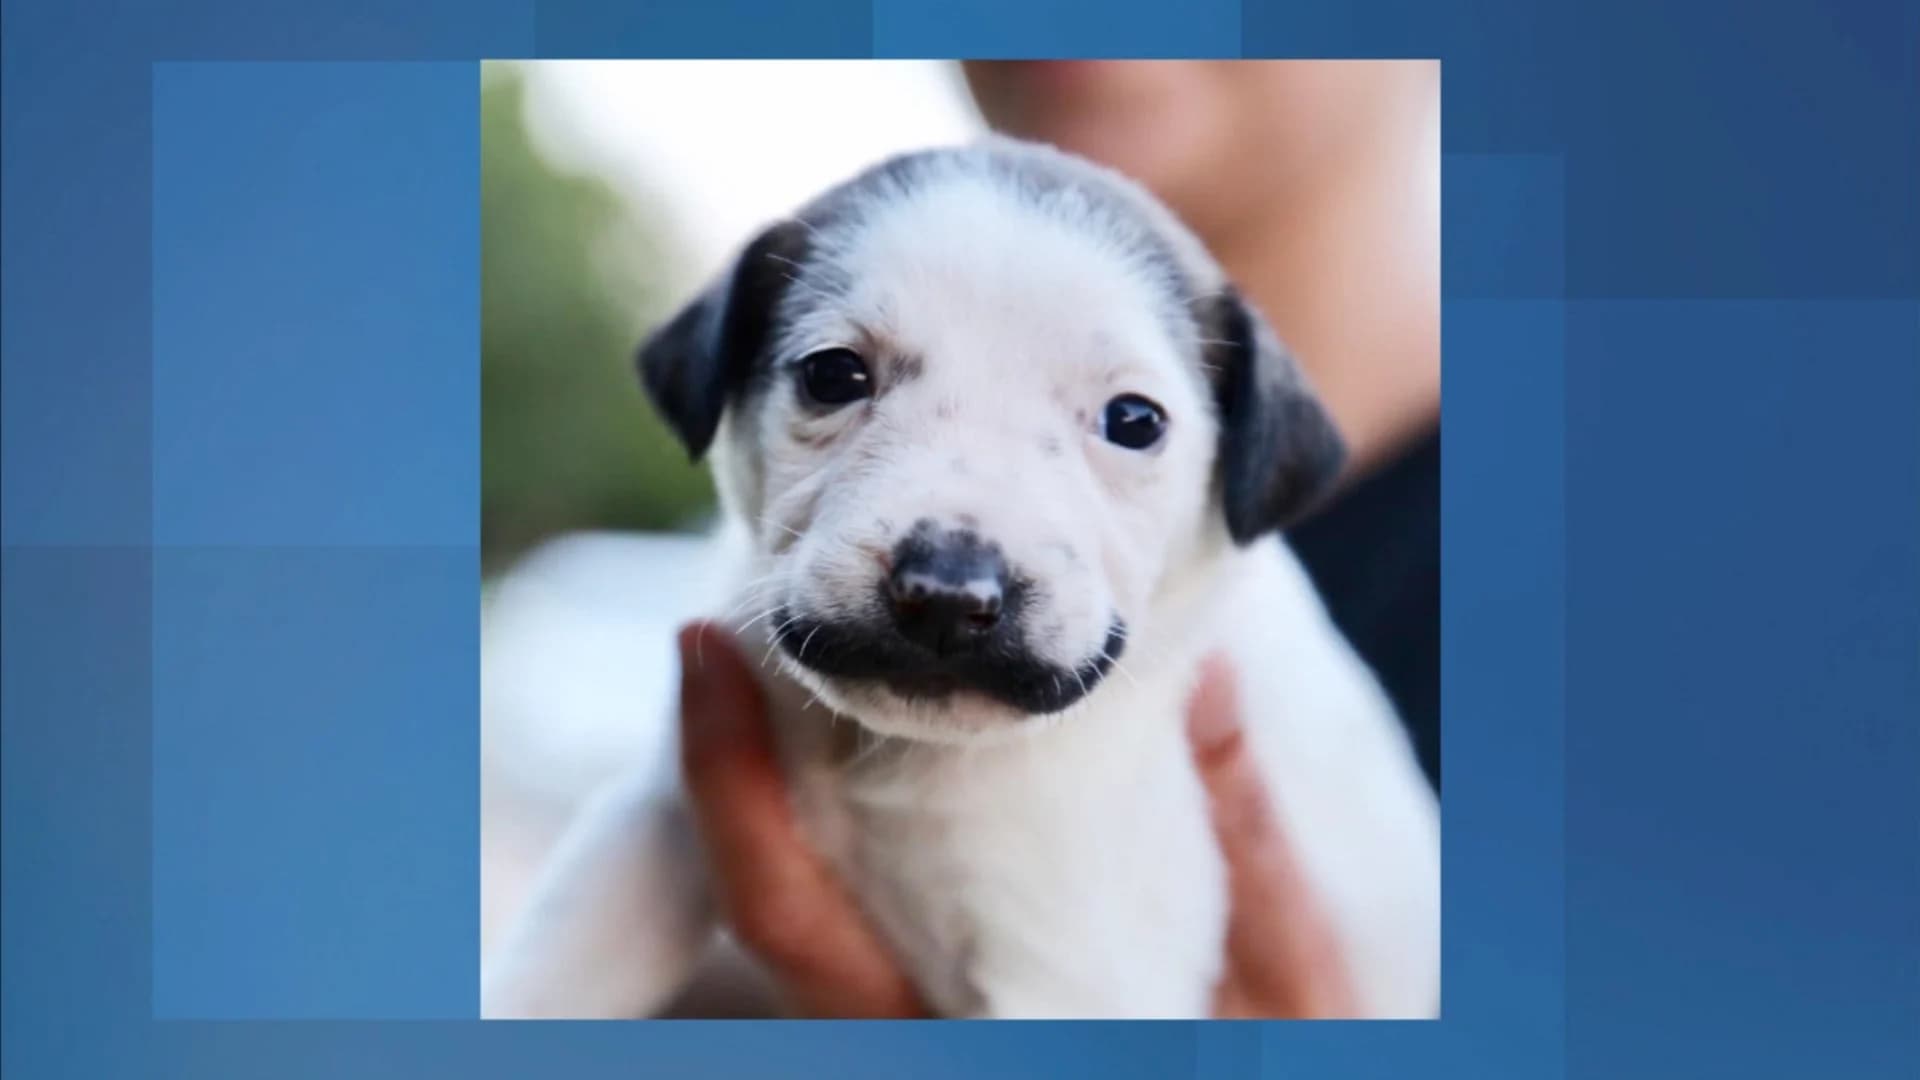 Animal rescue seeks forever home for adorable ‘mustache’ puppy